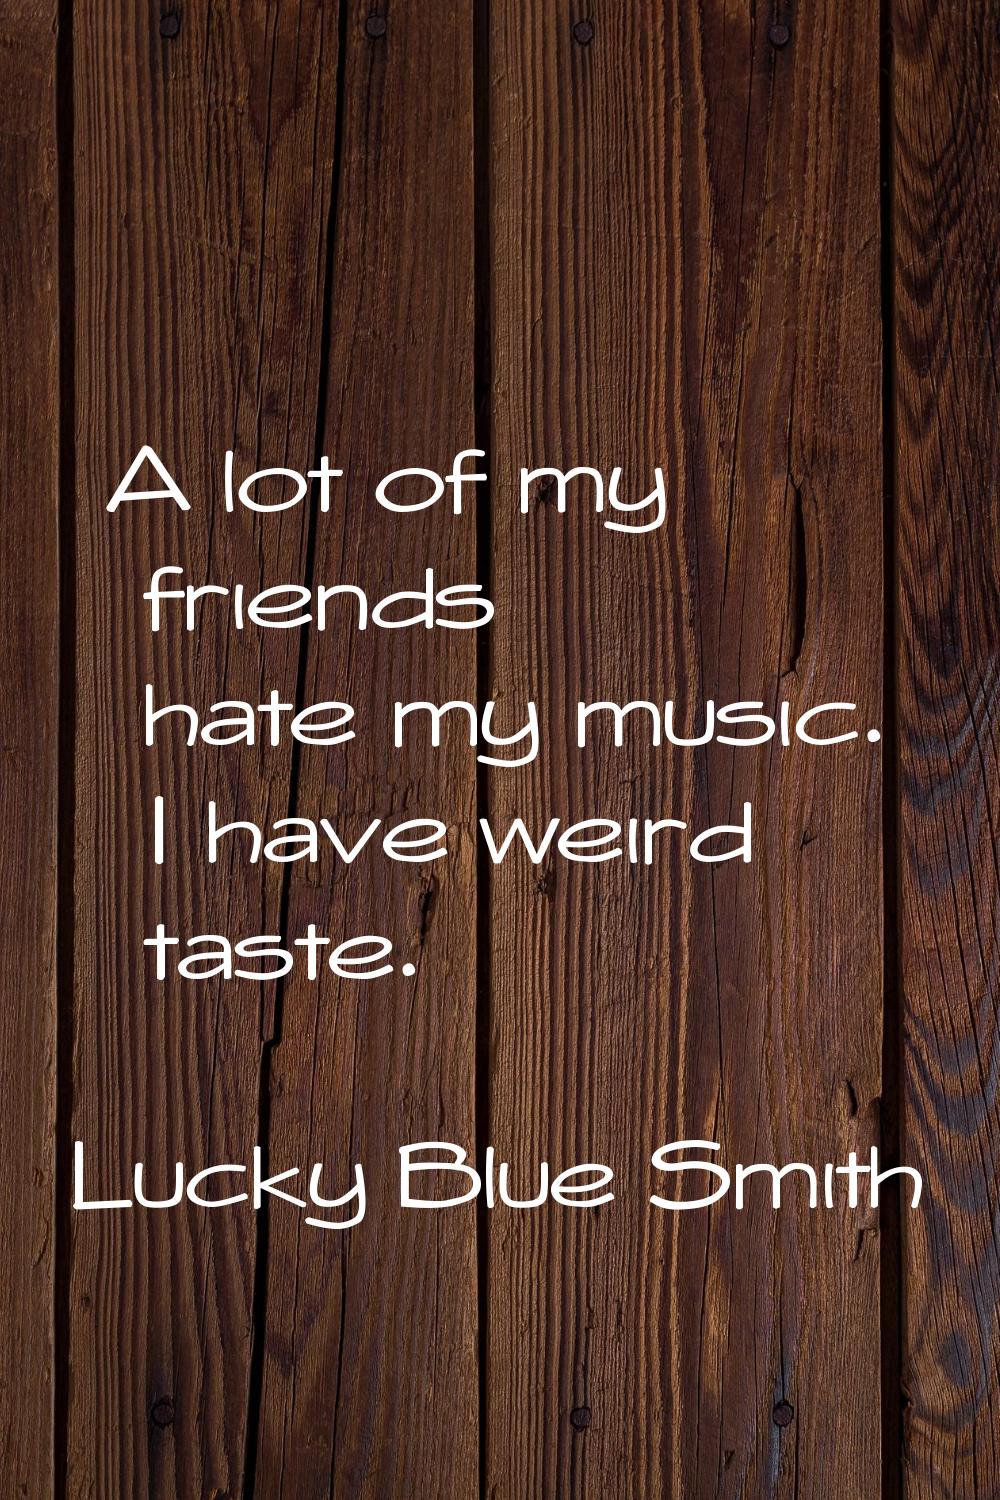 A lot of my friends hate my music. I have weird taste.